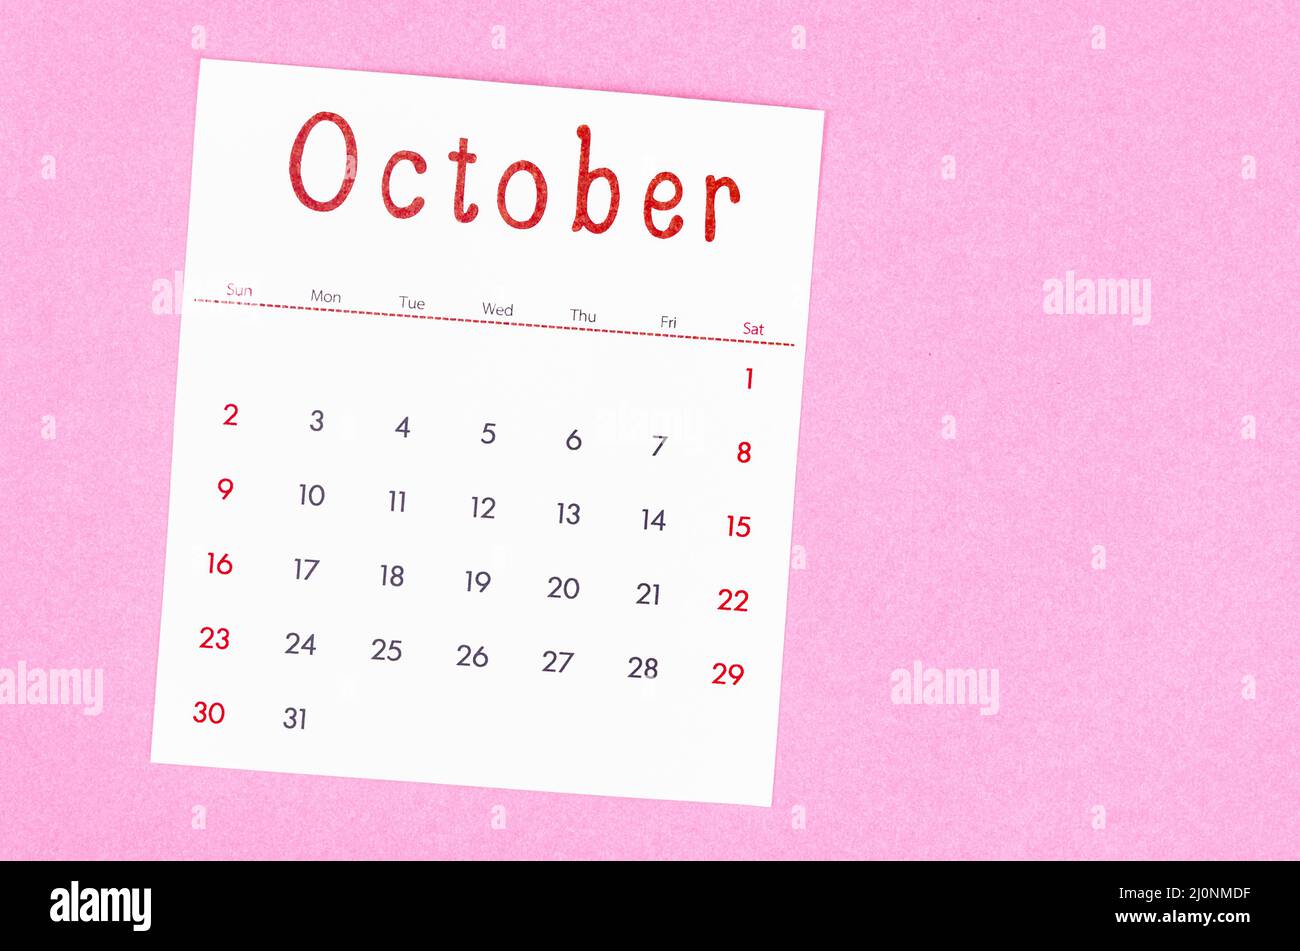 The October 2022 calendar on pink background with empty space. Stock Photo